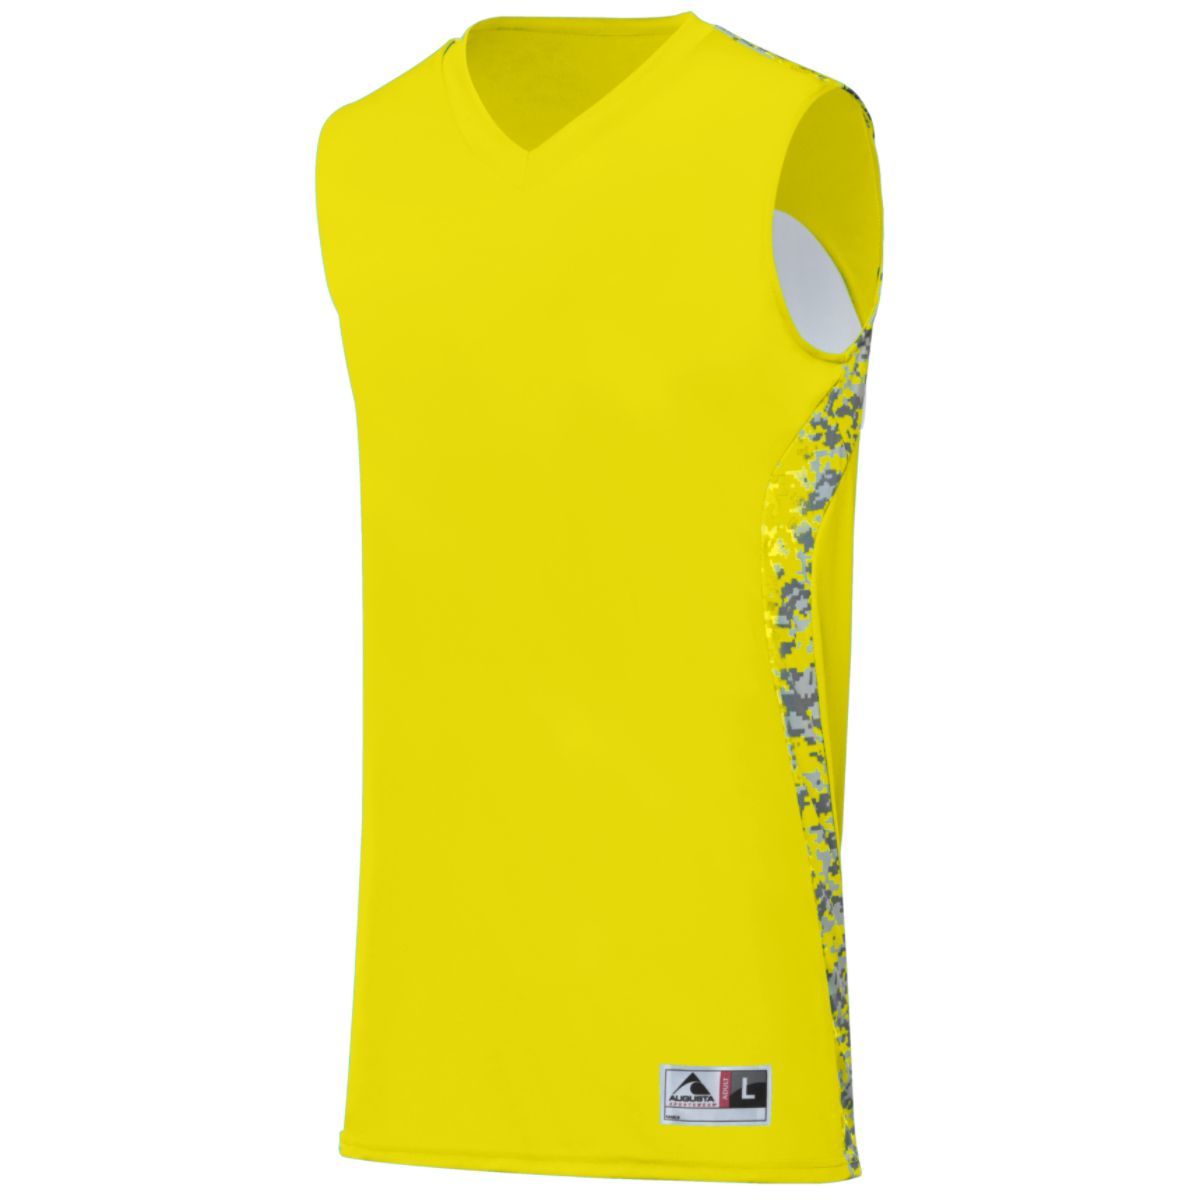 Augusta Sportswear Hook Shot Reversible Jersey in Power Yellow/Power Yellow Digi  -Part of the Adult, Adult-Jersey, Augusta-Products, Basketball, Shirts, All-Sports, All-Sports-1 product lines at KanaleyCreations.com